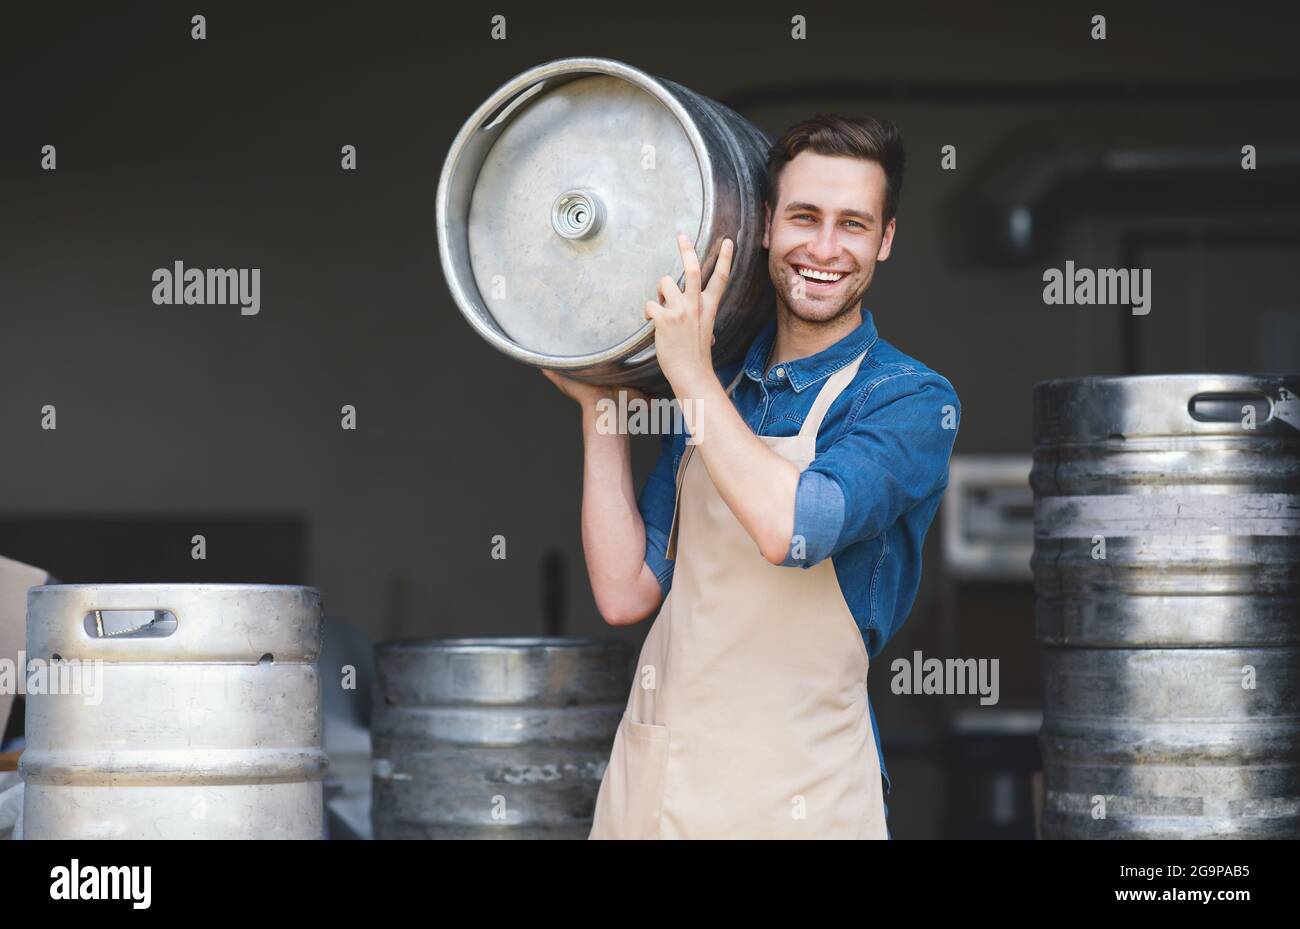 Brewery, work in warehouse, modern strong worker brewer loads ingredients Stock Photo